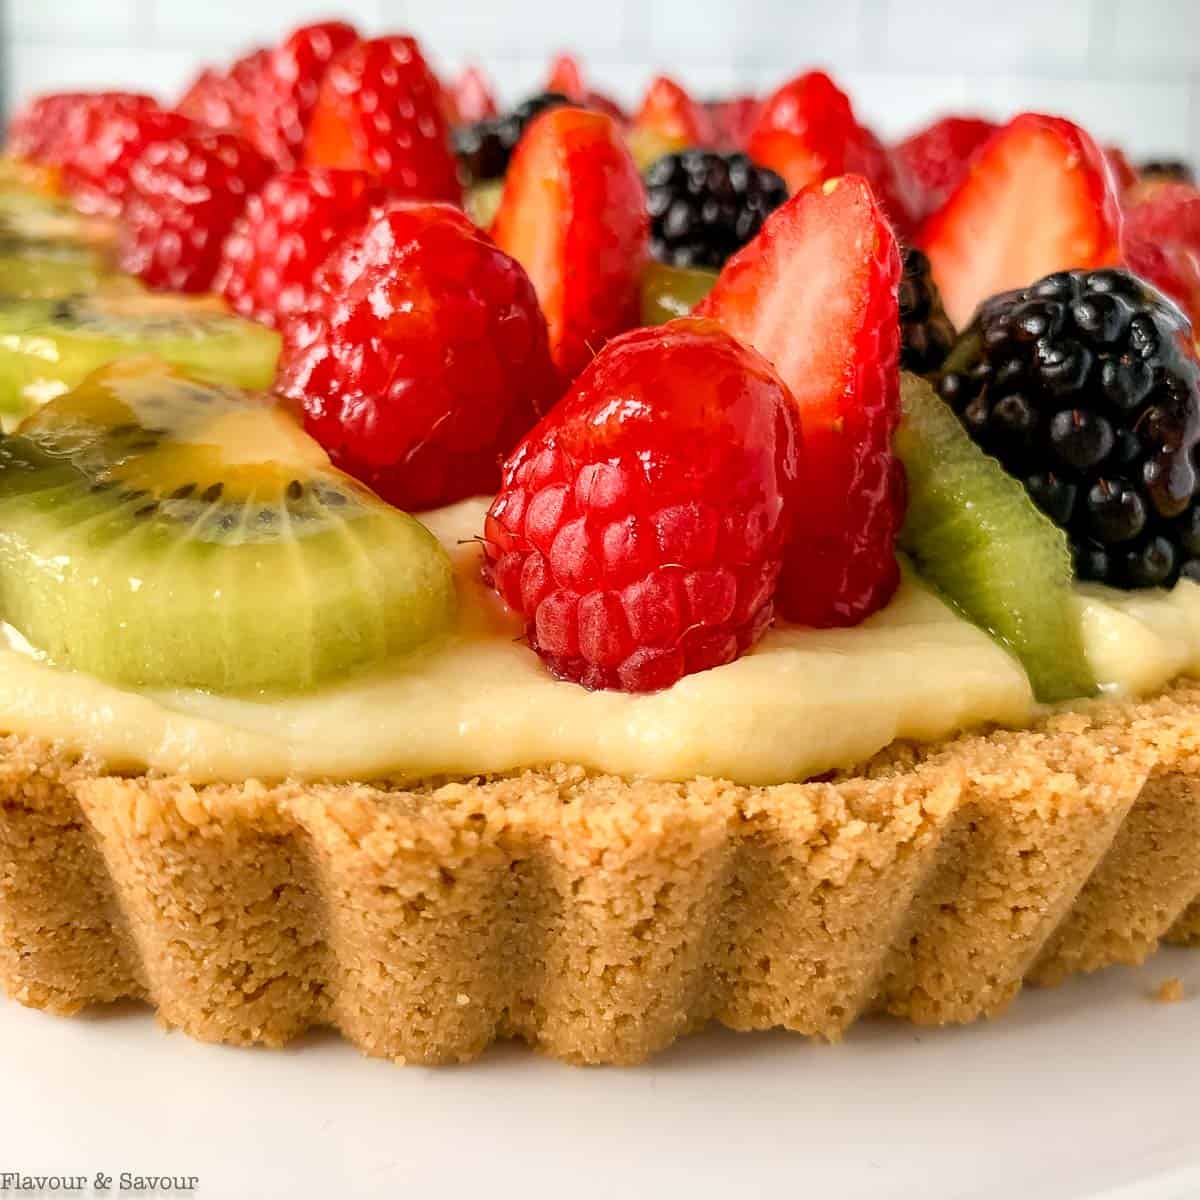 Close up view of a gluten-free fruit tart with fresh berries and fruit .